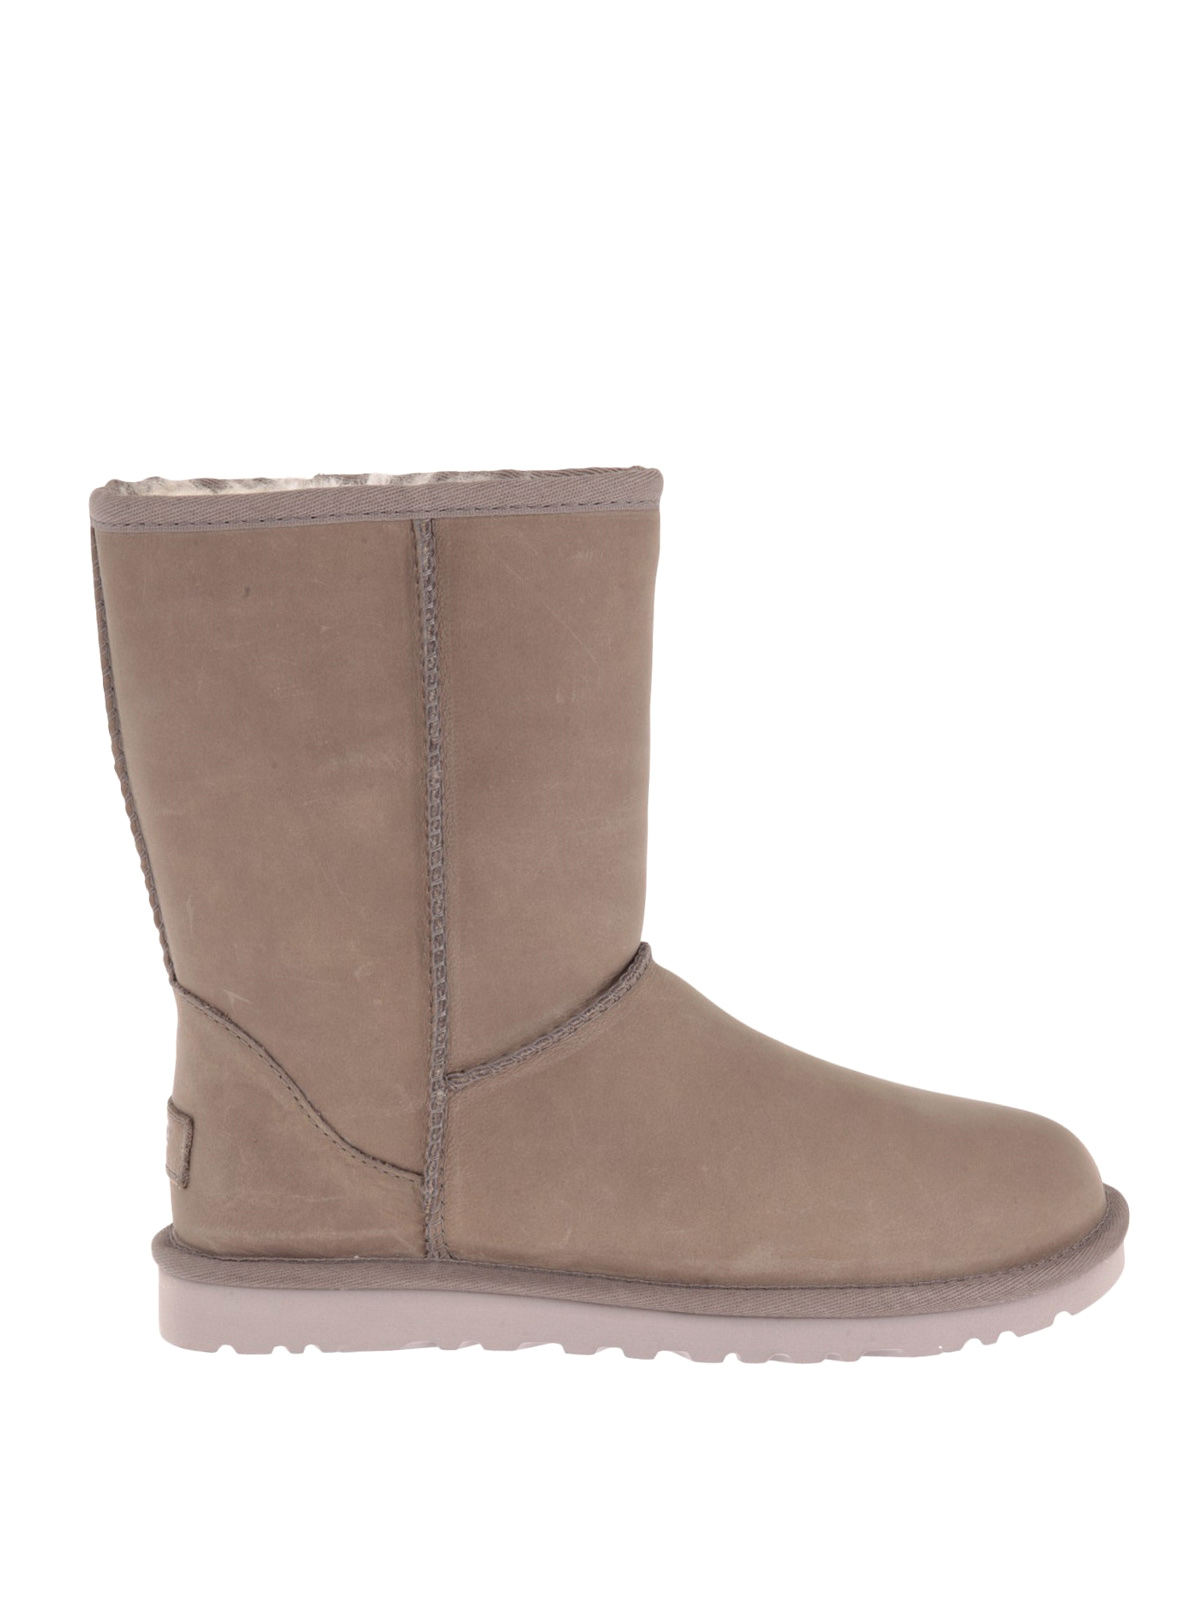 Ankle boots Ugg - Classic Short Leather booties - 1016559PLATER